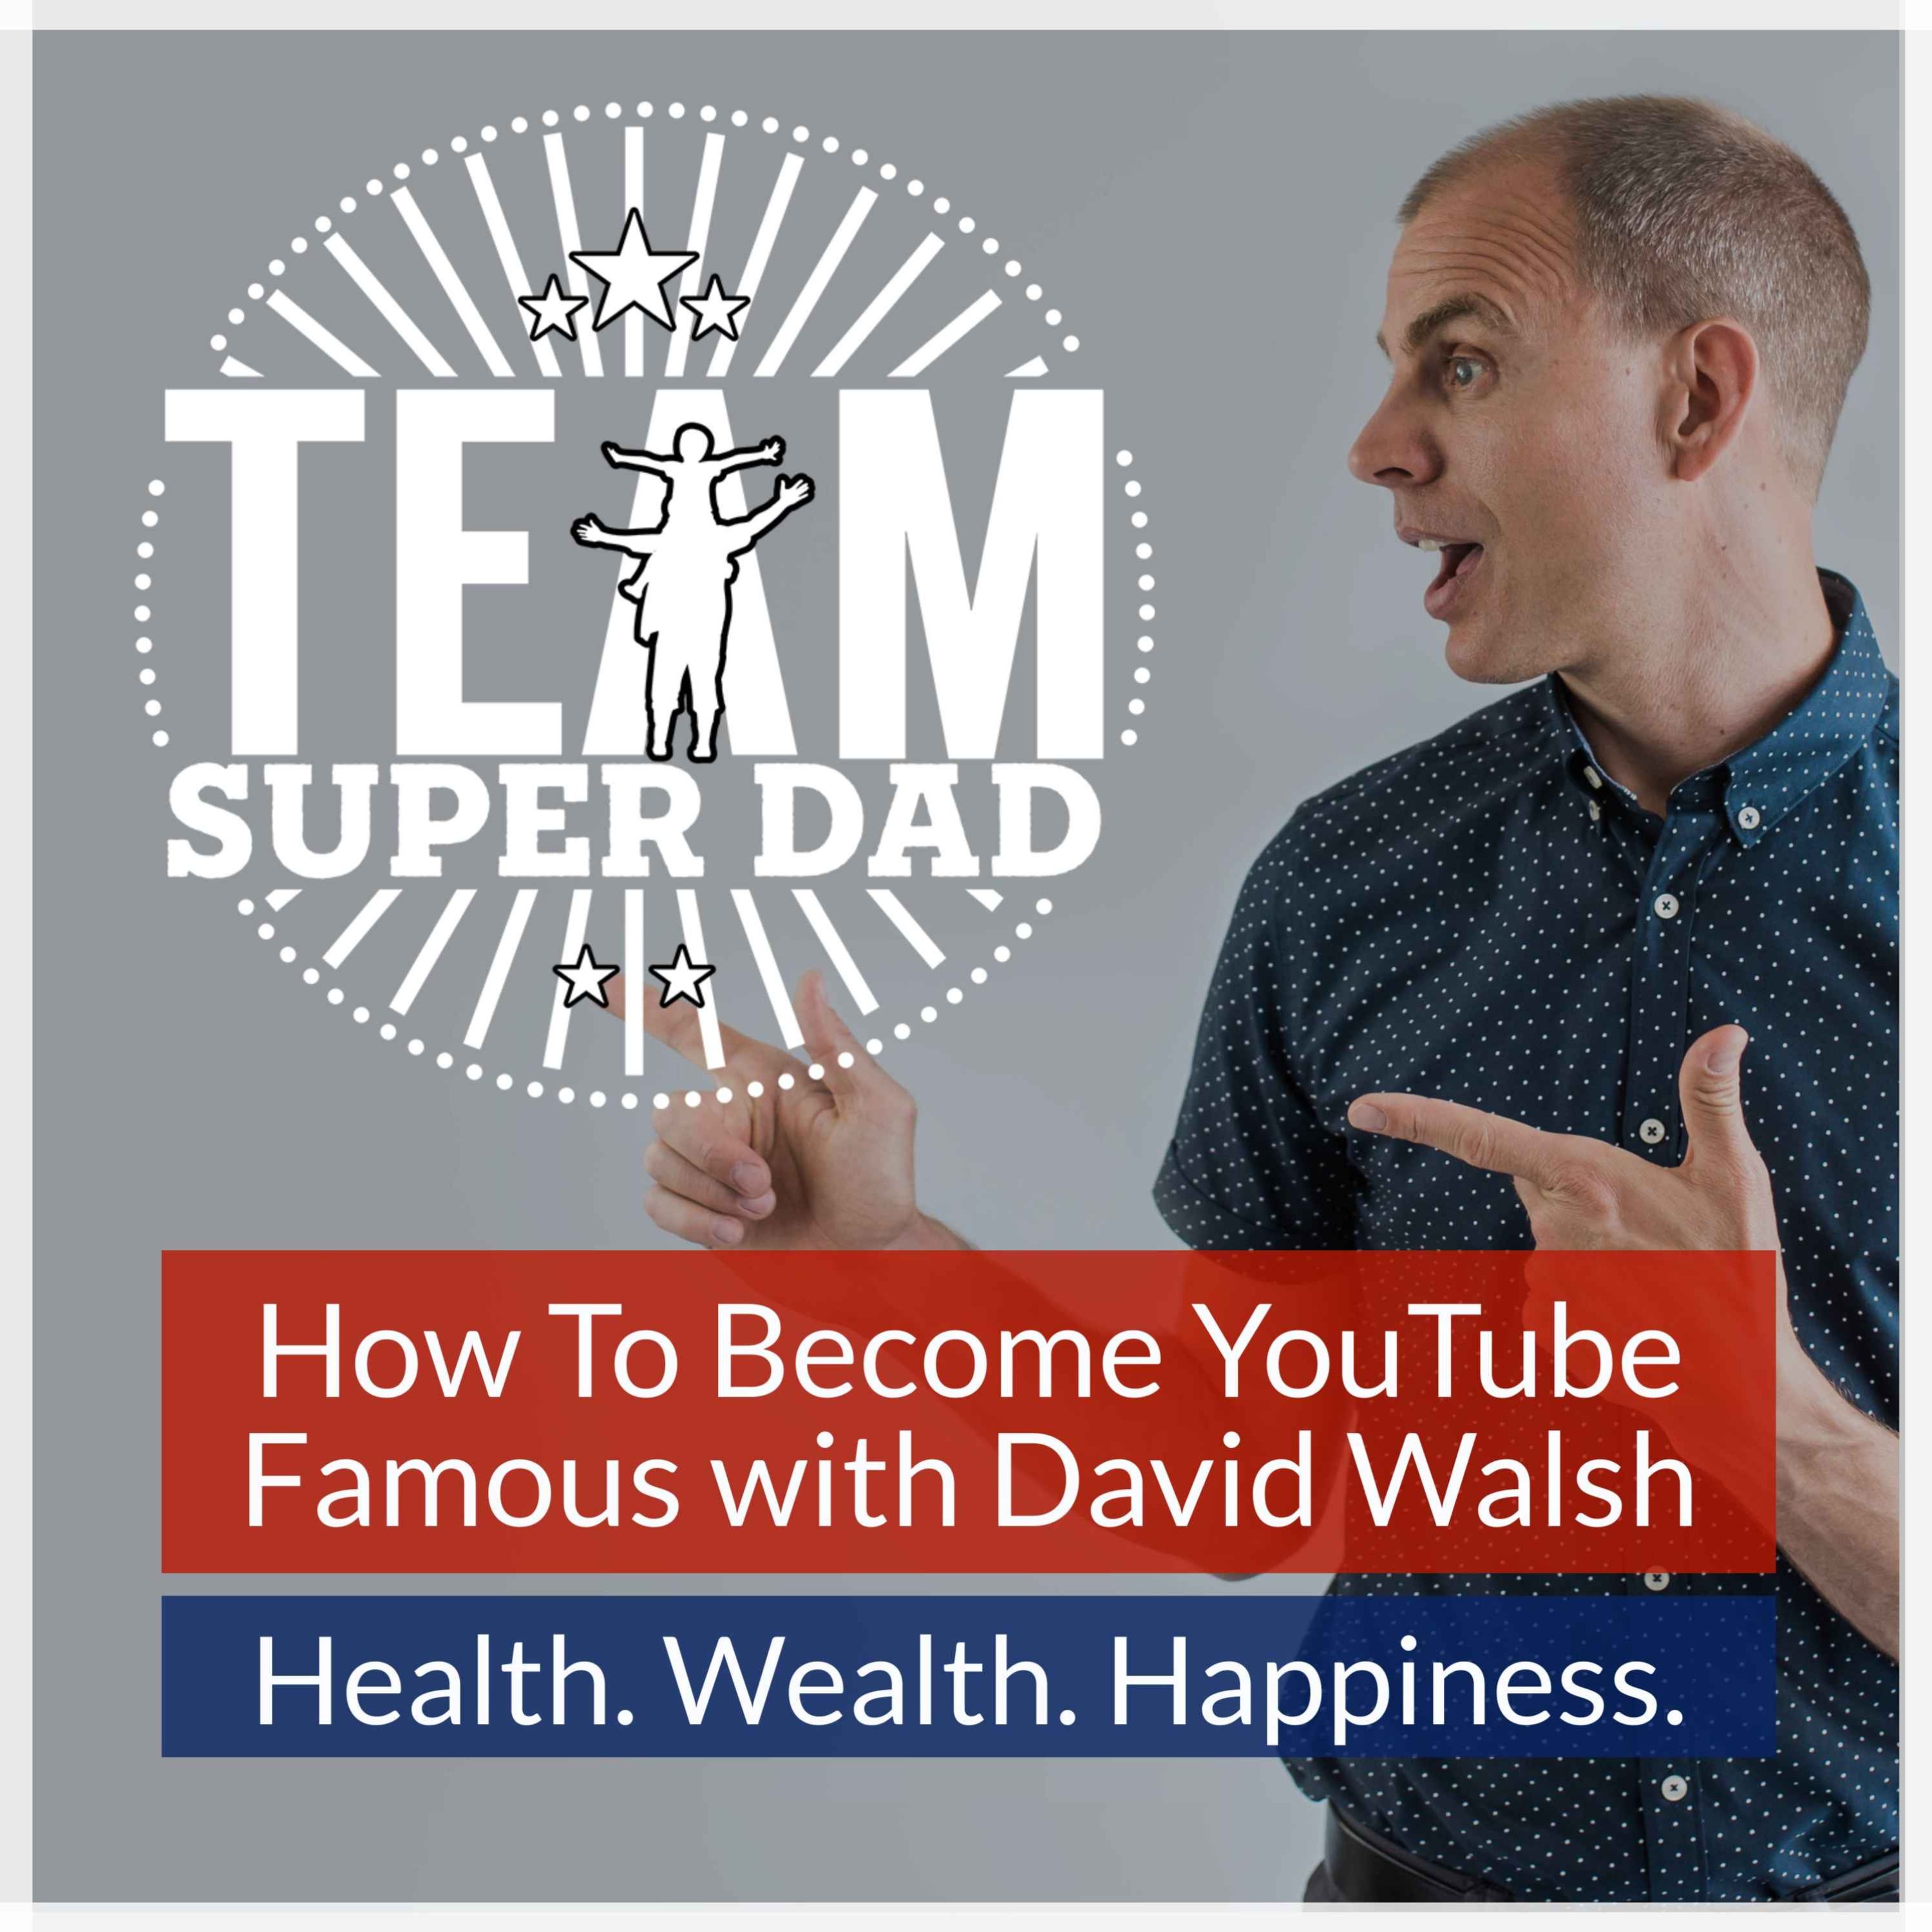 How To Become YouTube Famous with David Walsh